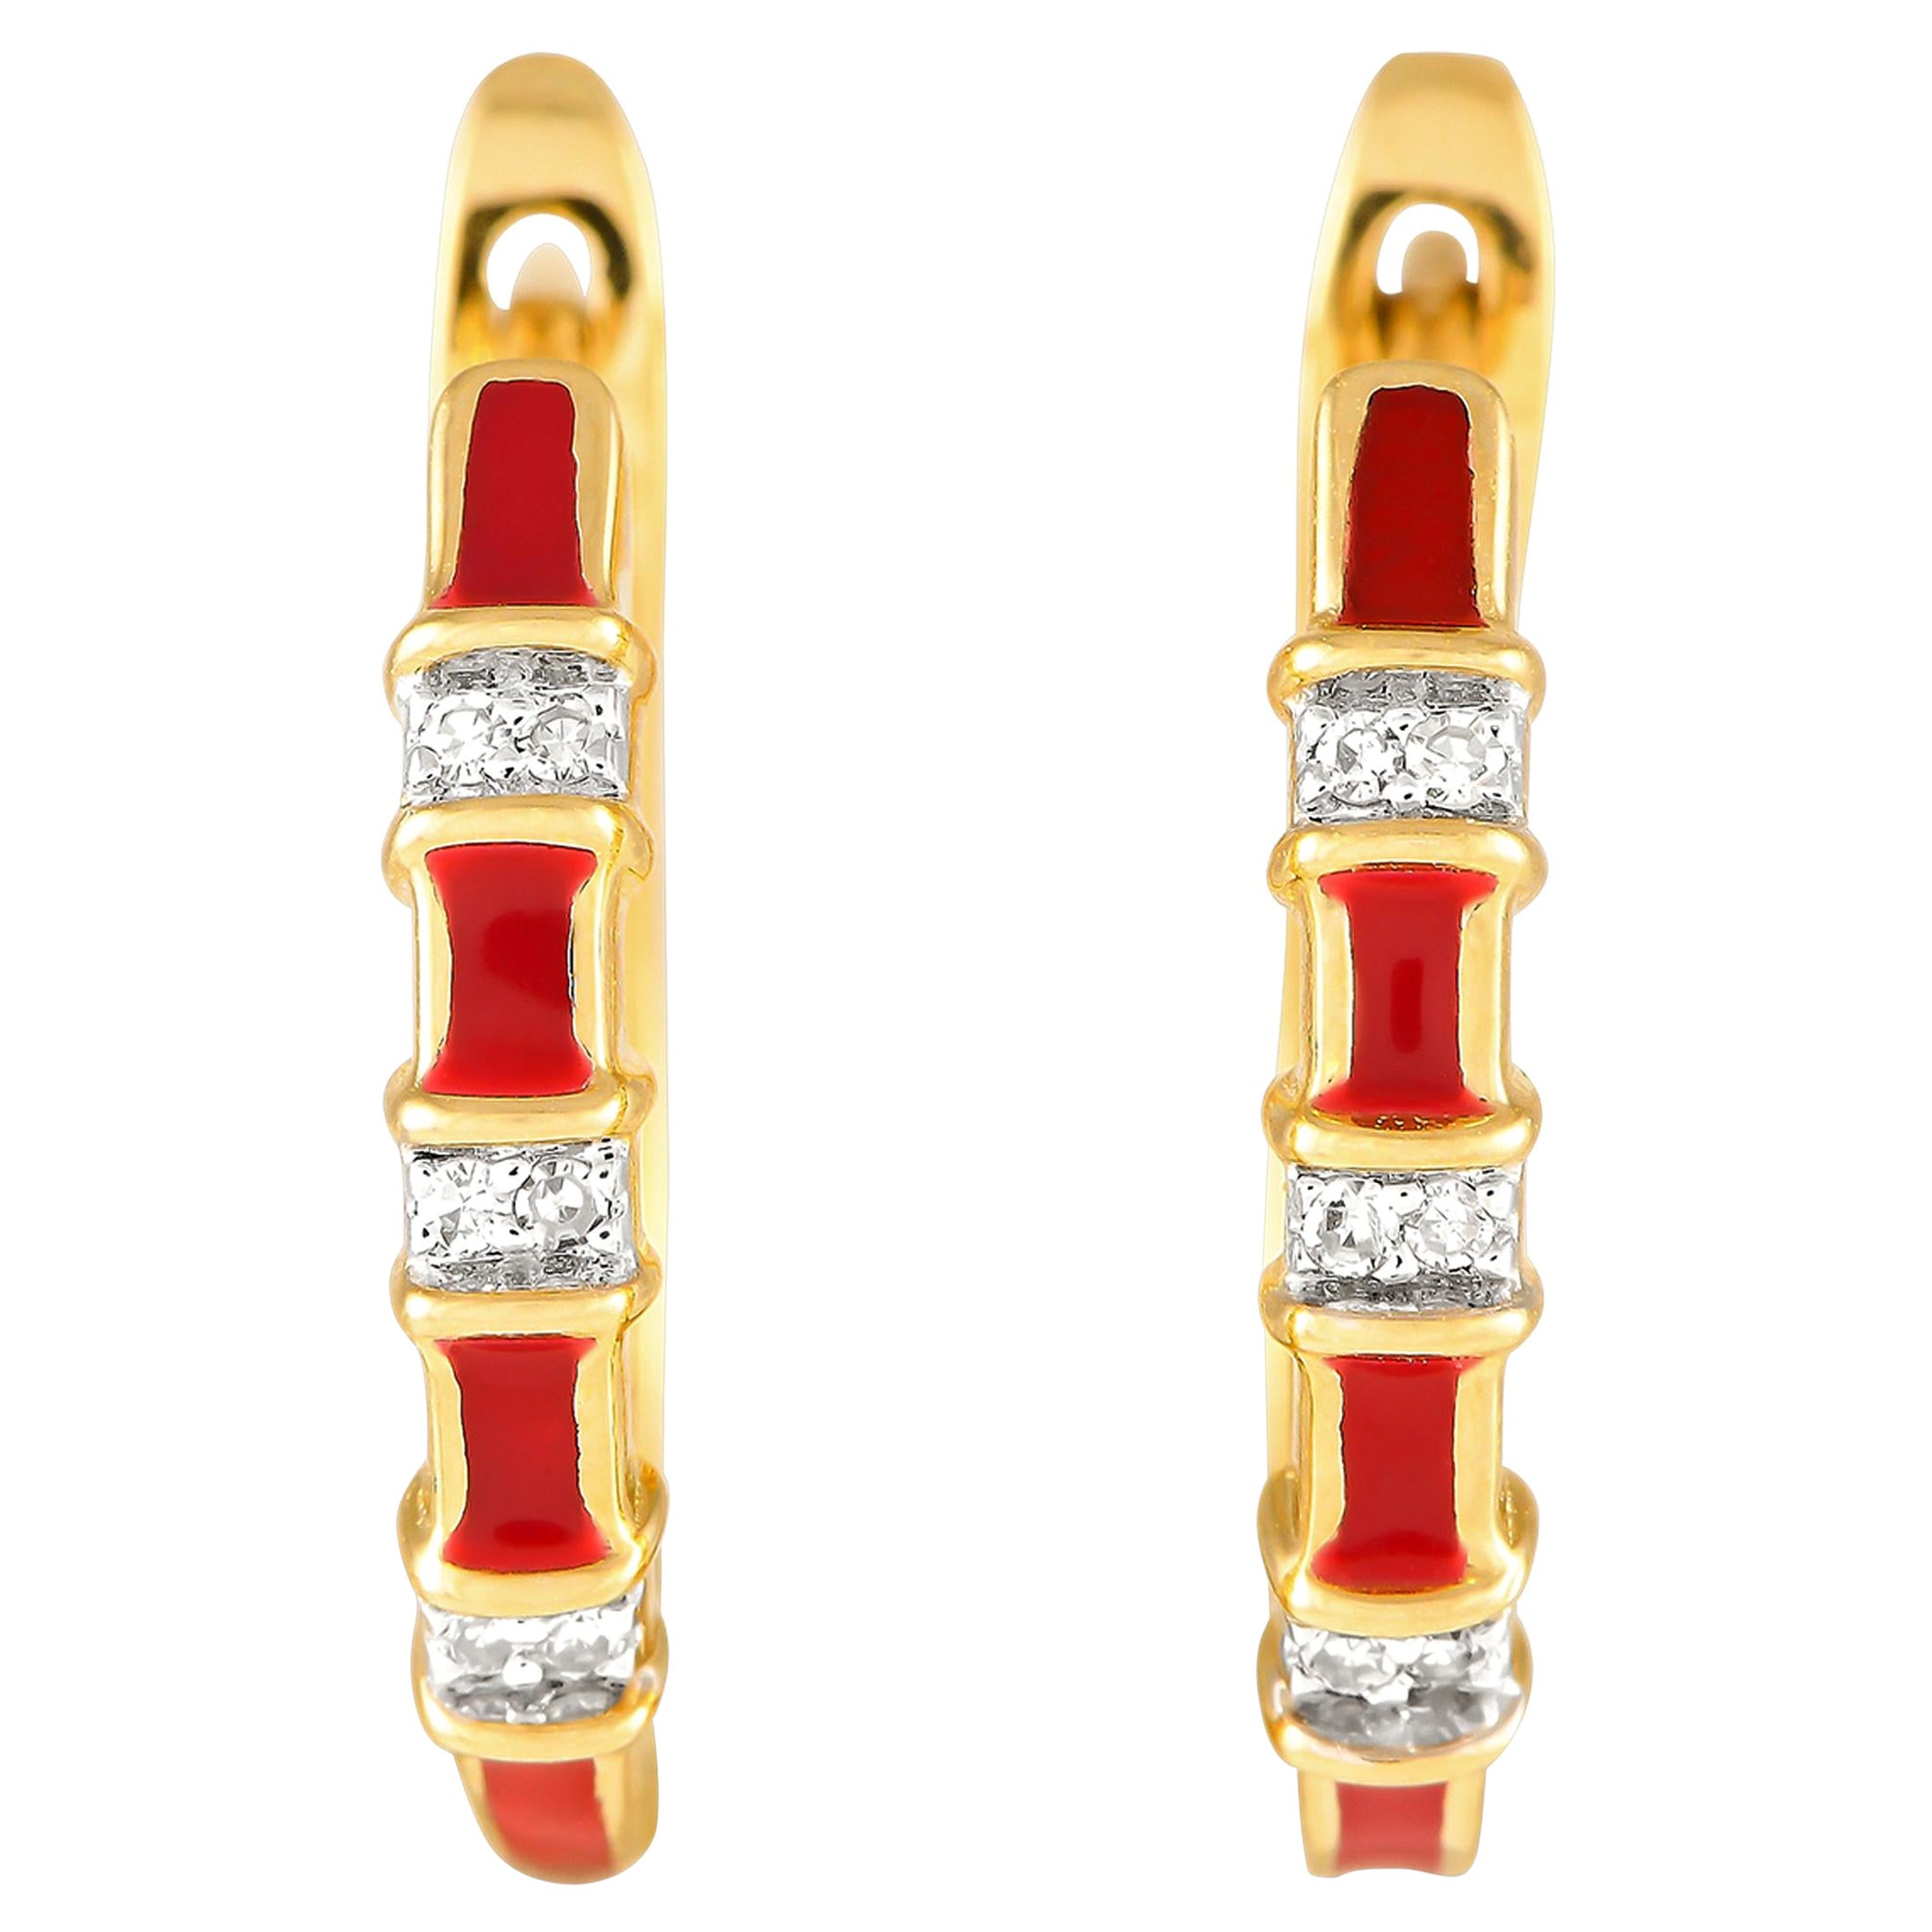 LB Exclusive 14K Yellow Gold 0.05ct Diamond and Red Enamel Earrings ER28196